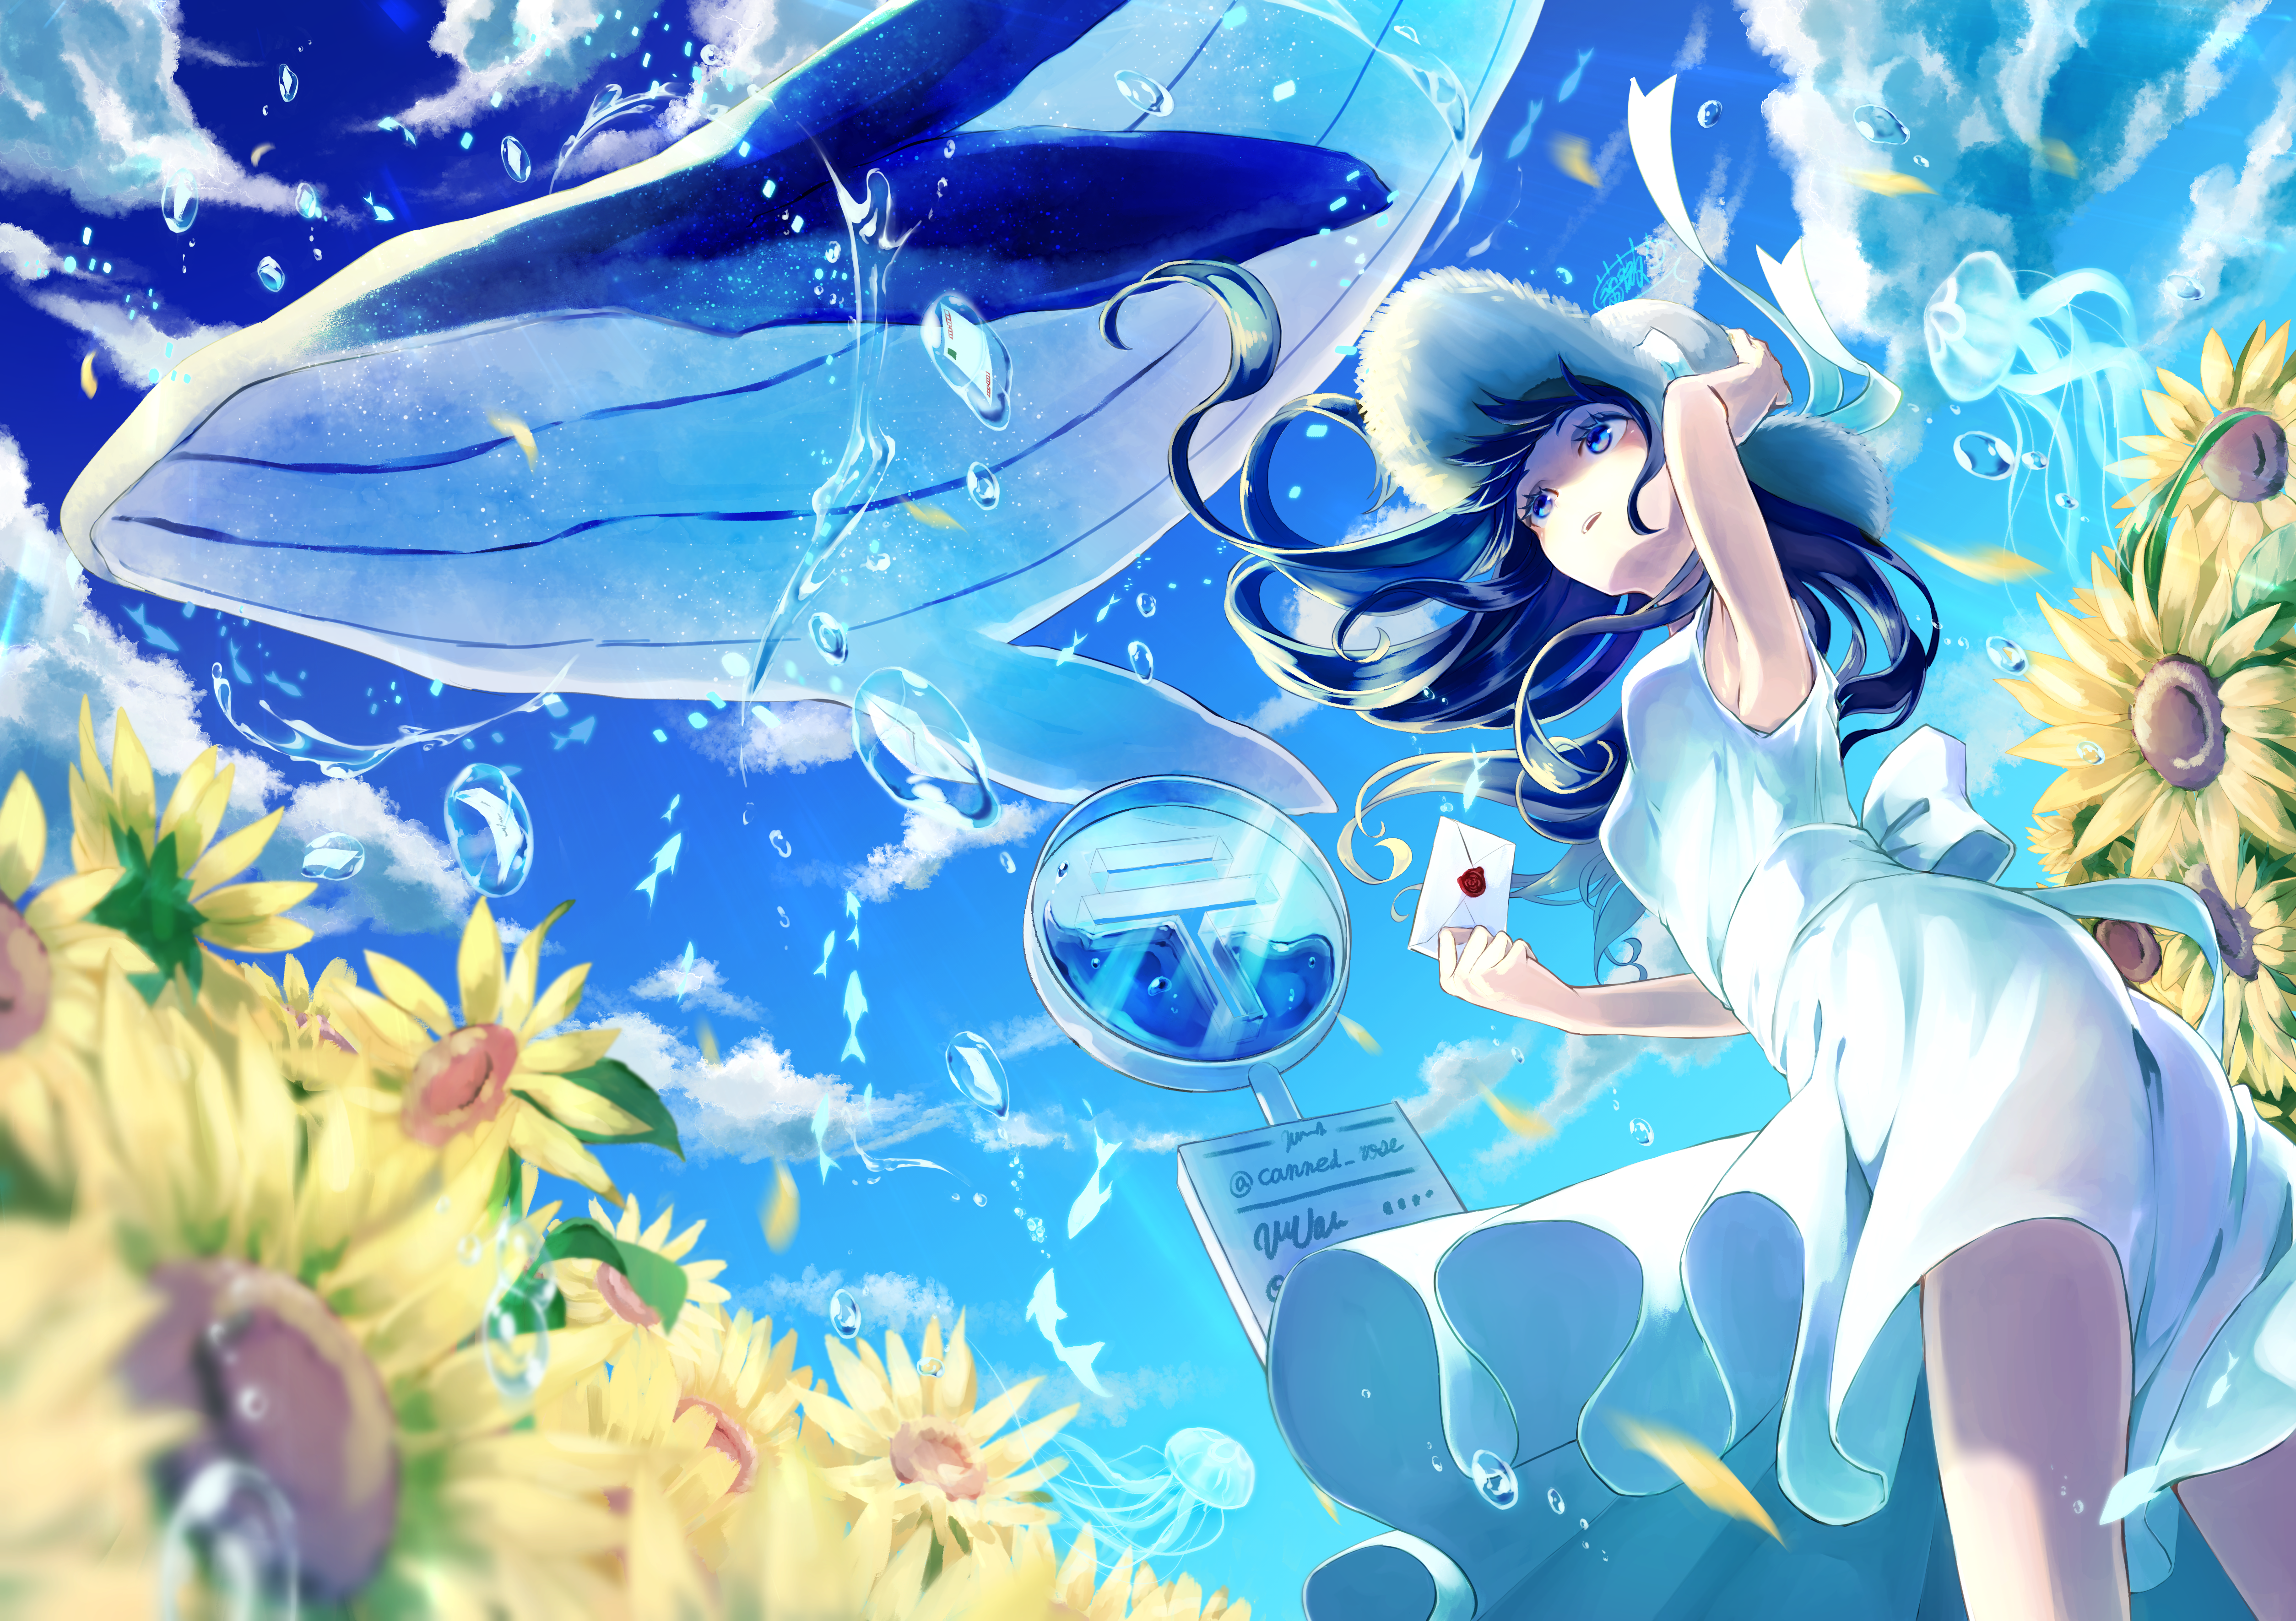 Anime 5016x3541 anime girls anime looking up whale flying whales clouds sky wind dress sunflowers long hair letter water drops animals standing leaves petals hat sun hats blue eyes hair blowing in the wind signs Canned Rose